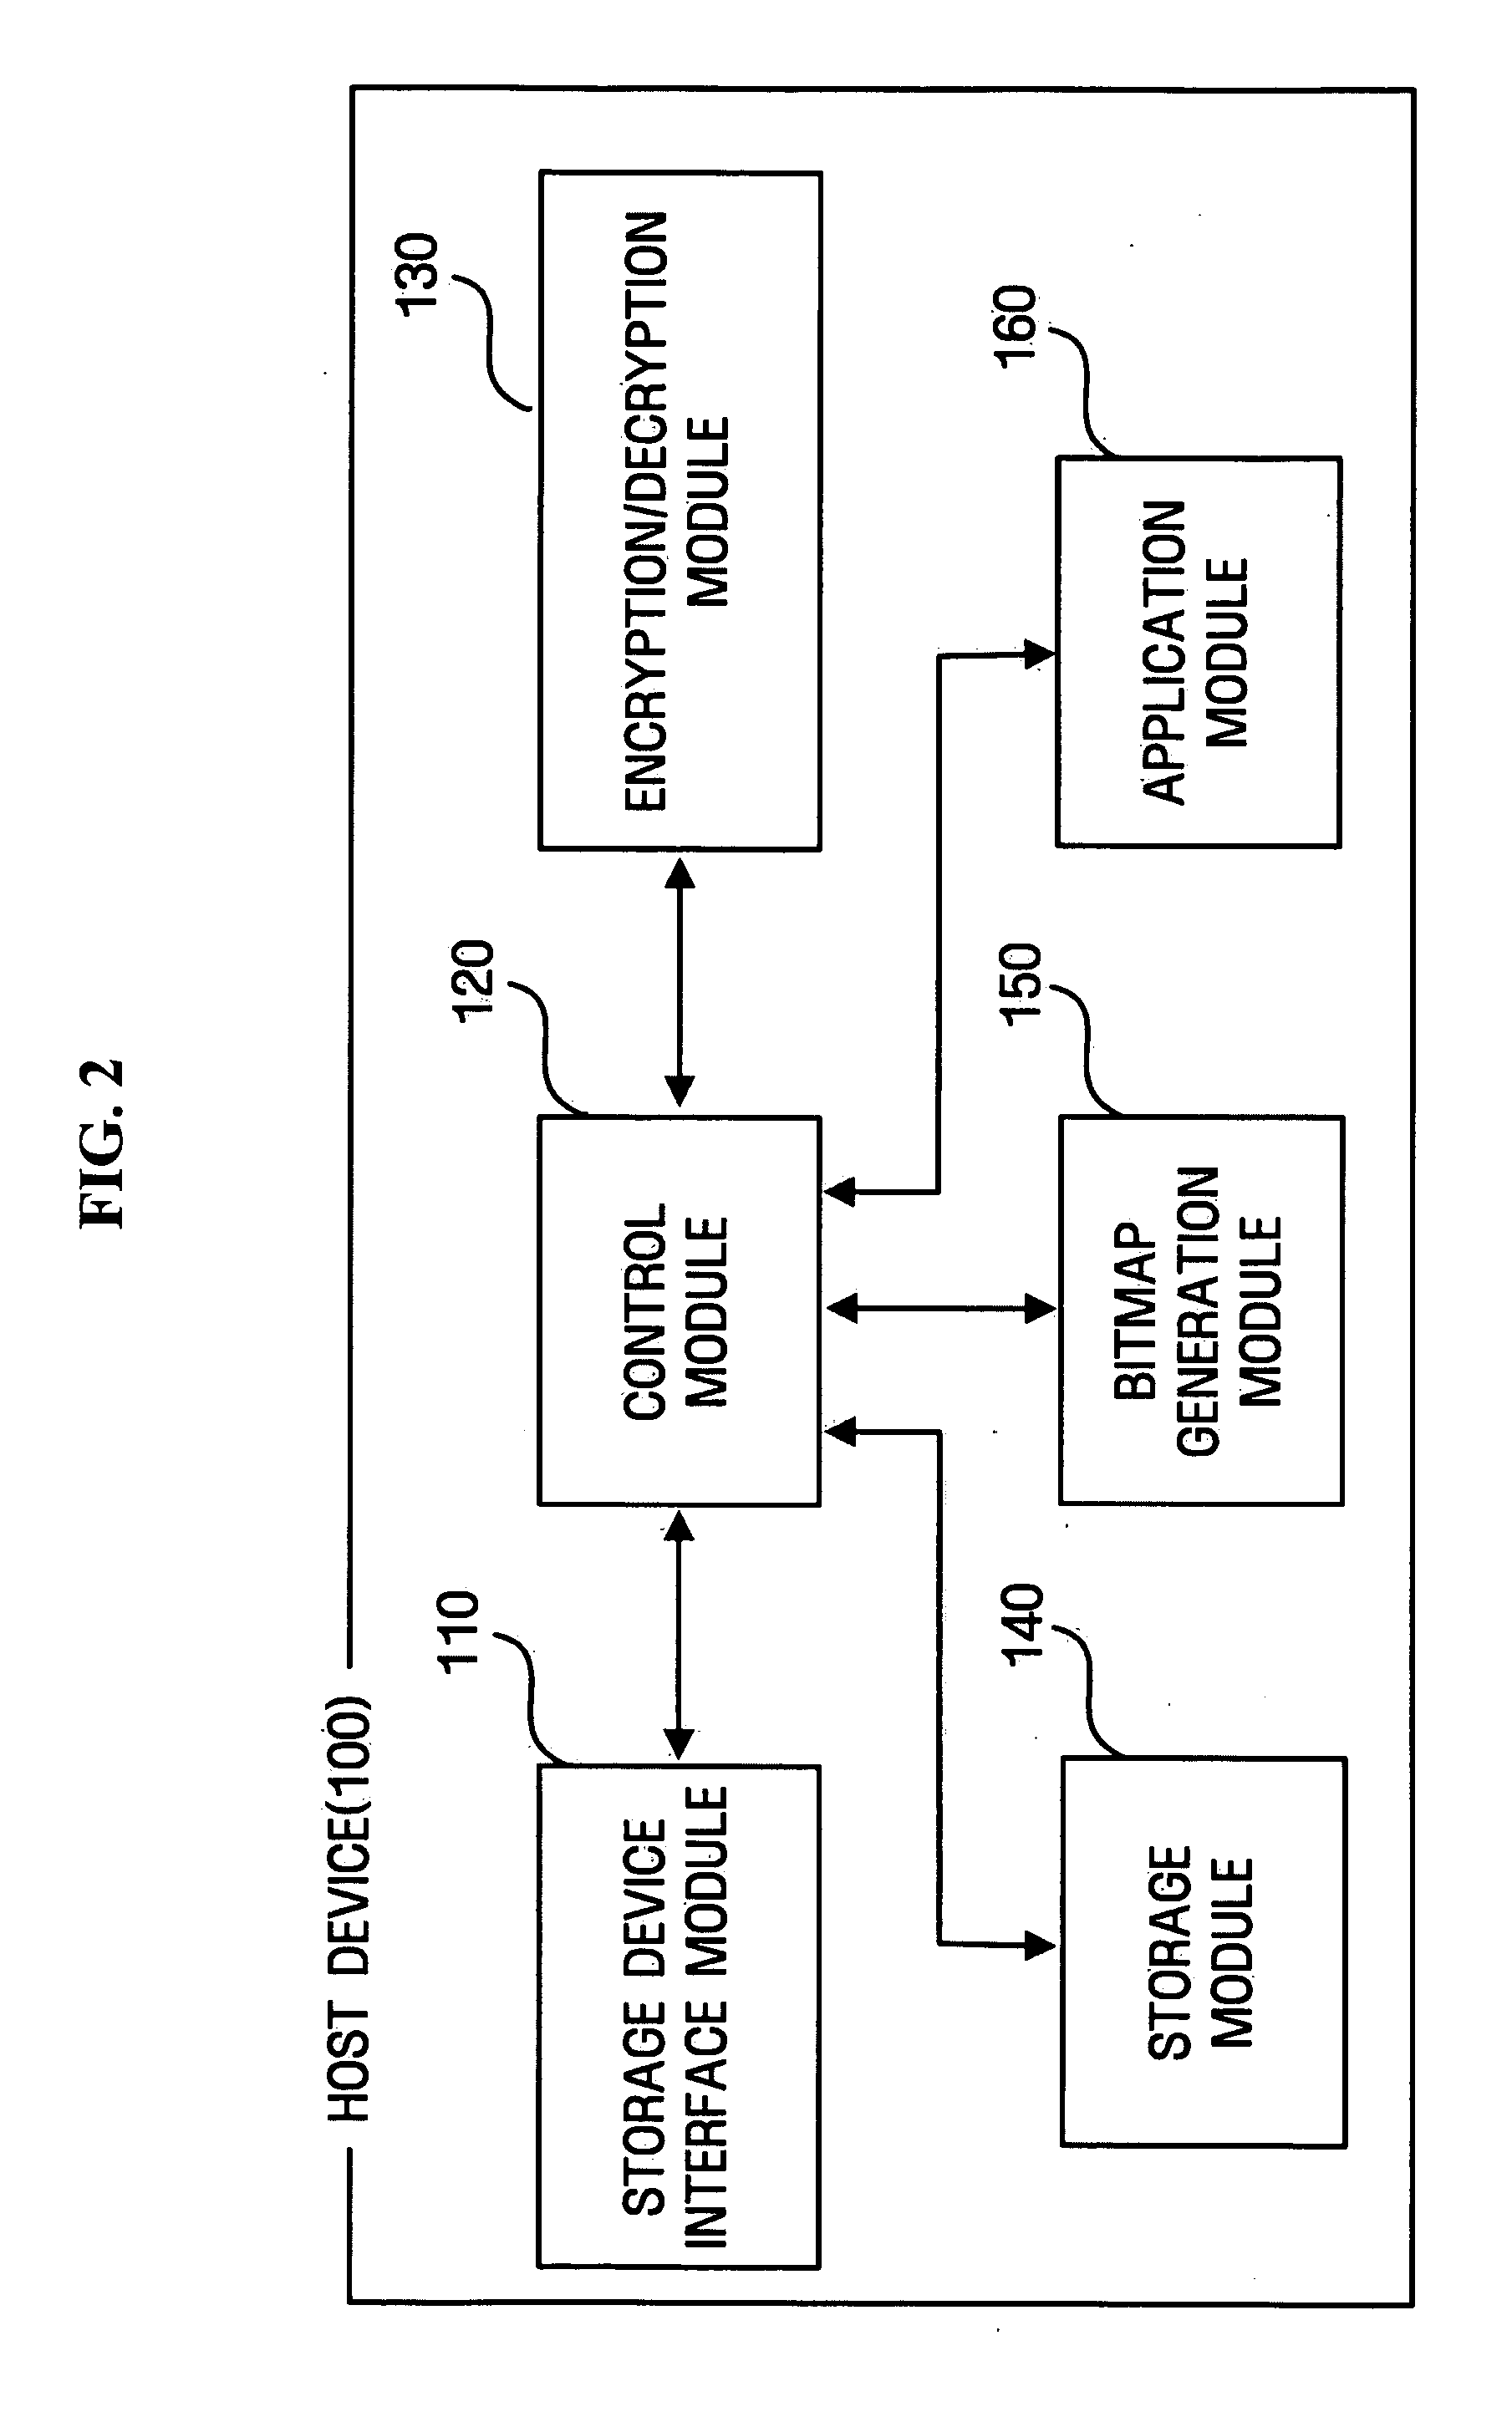 Host device, portable storage device, and method for updating meta information regarding right objects stored in portable storage device